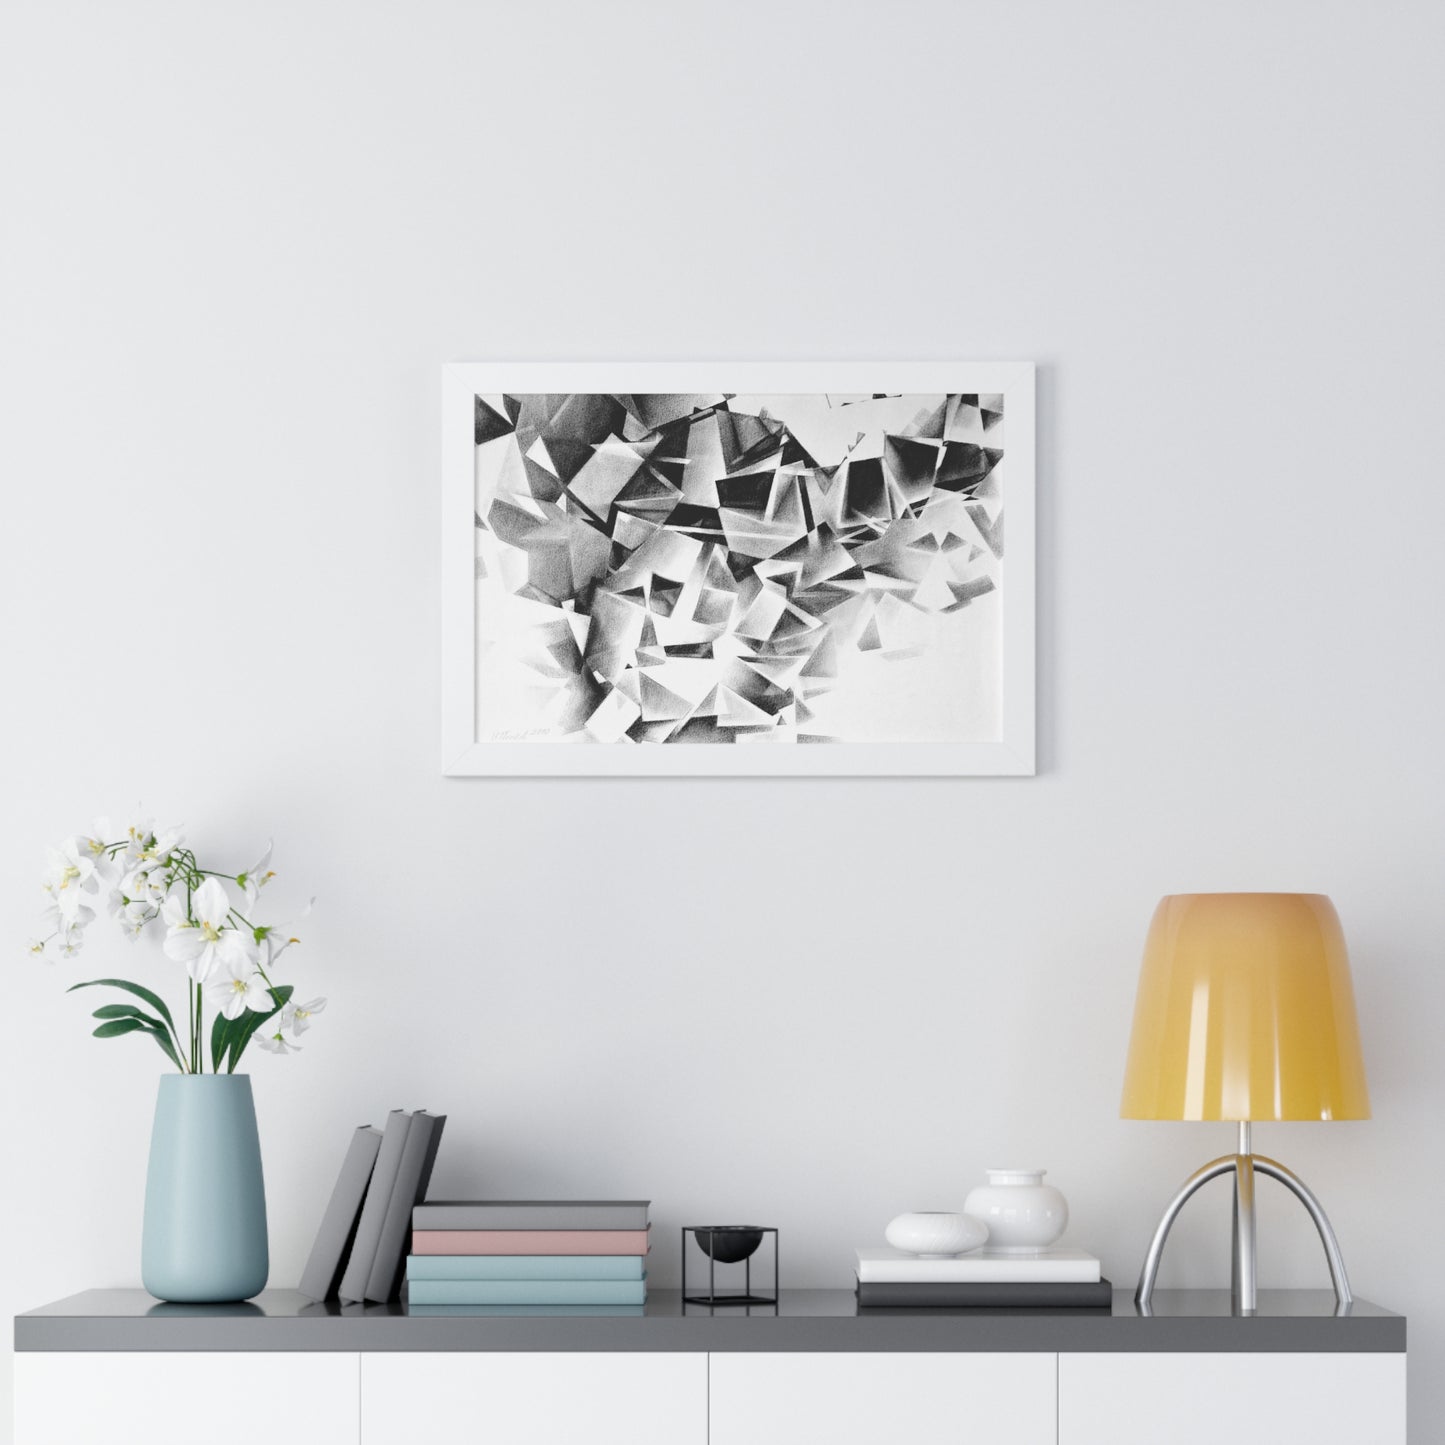 Whirlstructure I - Framed Poster Print, Wall Art, Charcoal, Abstract Black and White Decor